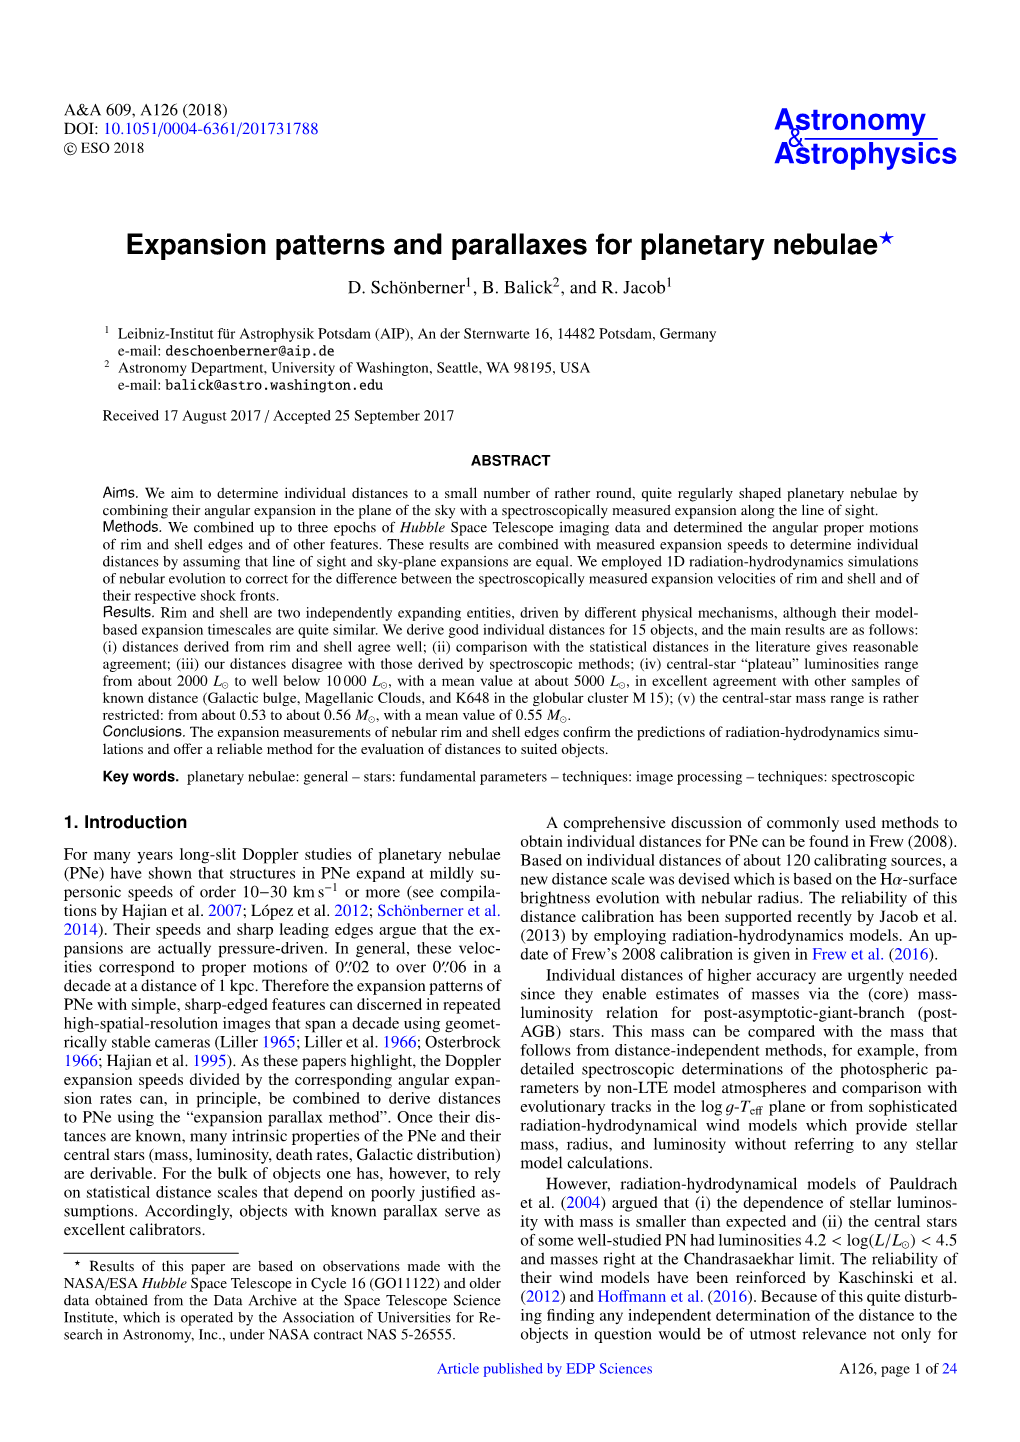 Expansion Patterns and Parallaxes for Planetary Nebulae? D